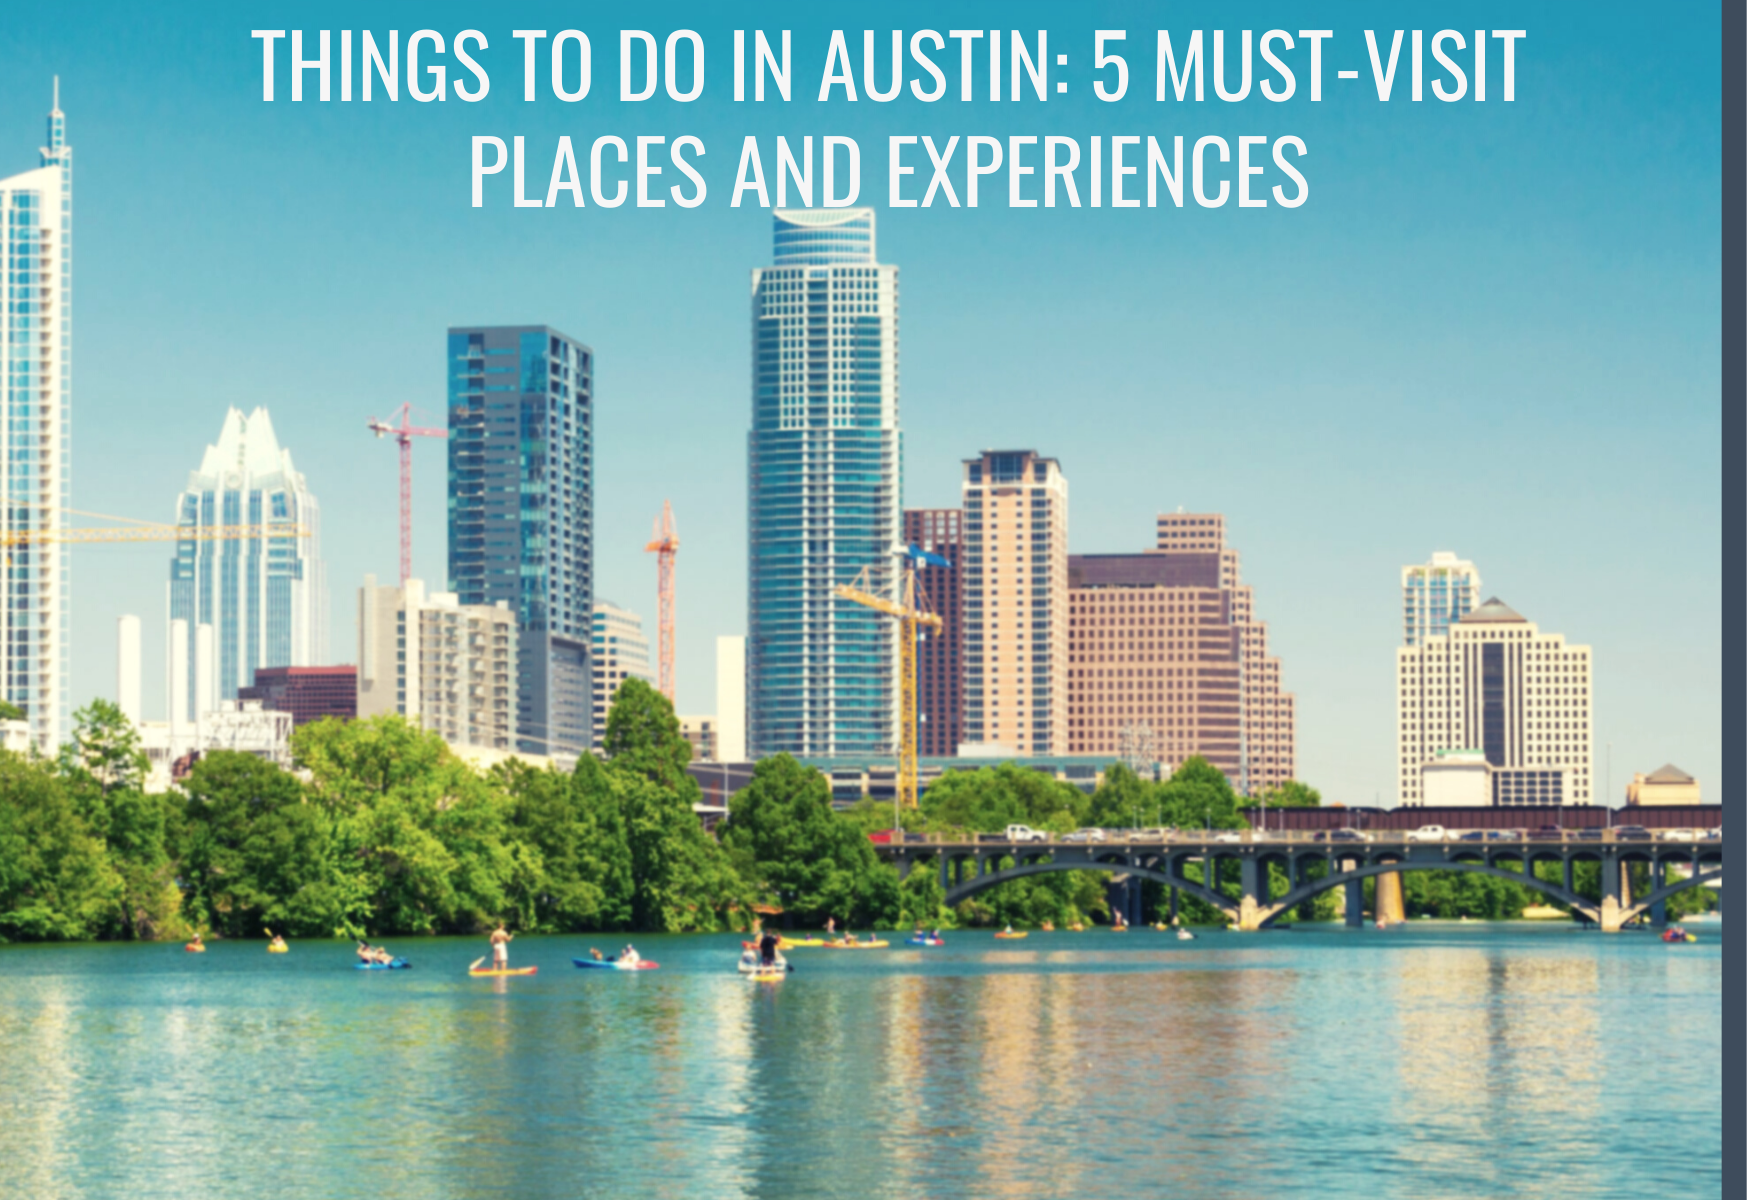 Things To Do in Austin: 5 Must-Visit Places and Experiences